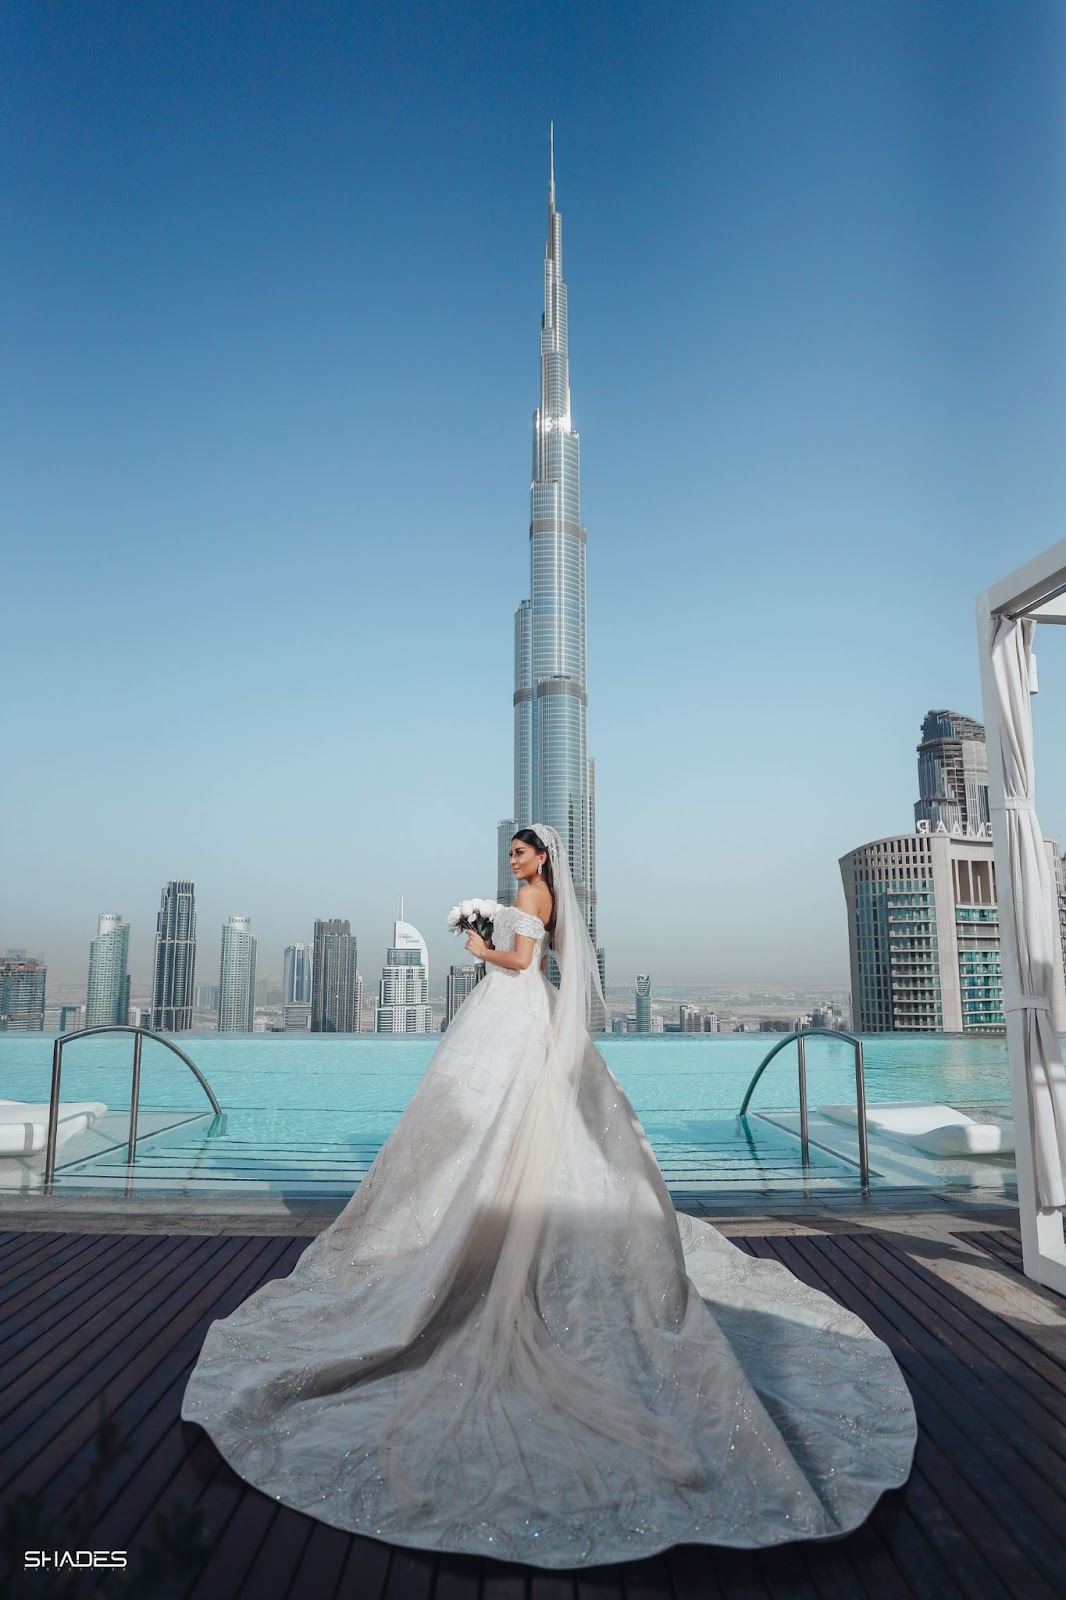 Top 10 Locations For Wedding Photography In Dubai, According To  Renowned Photographer